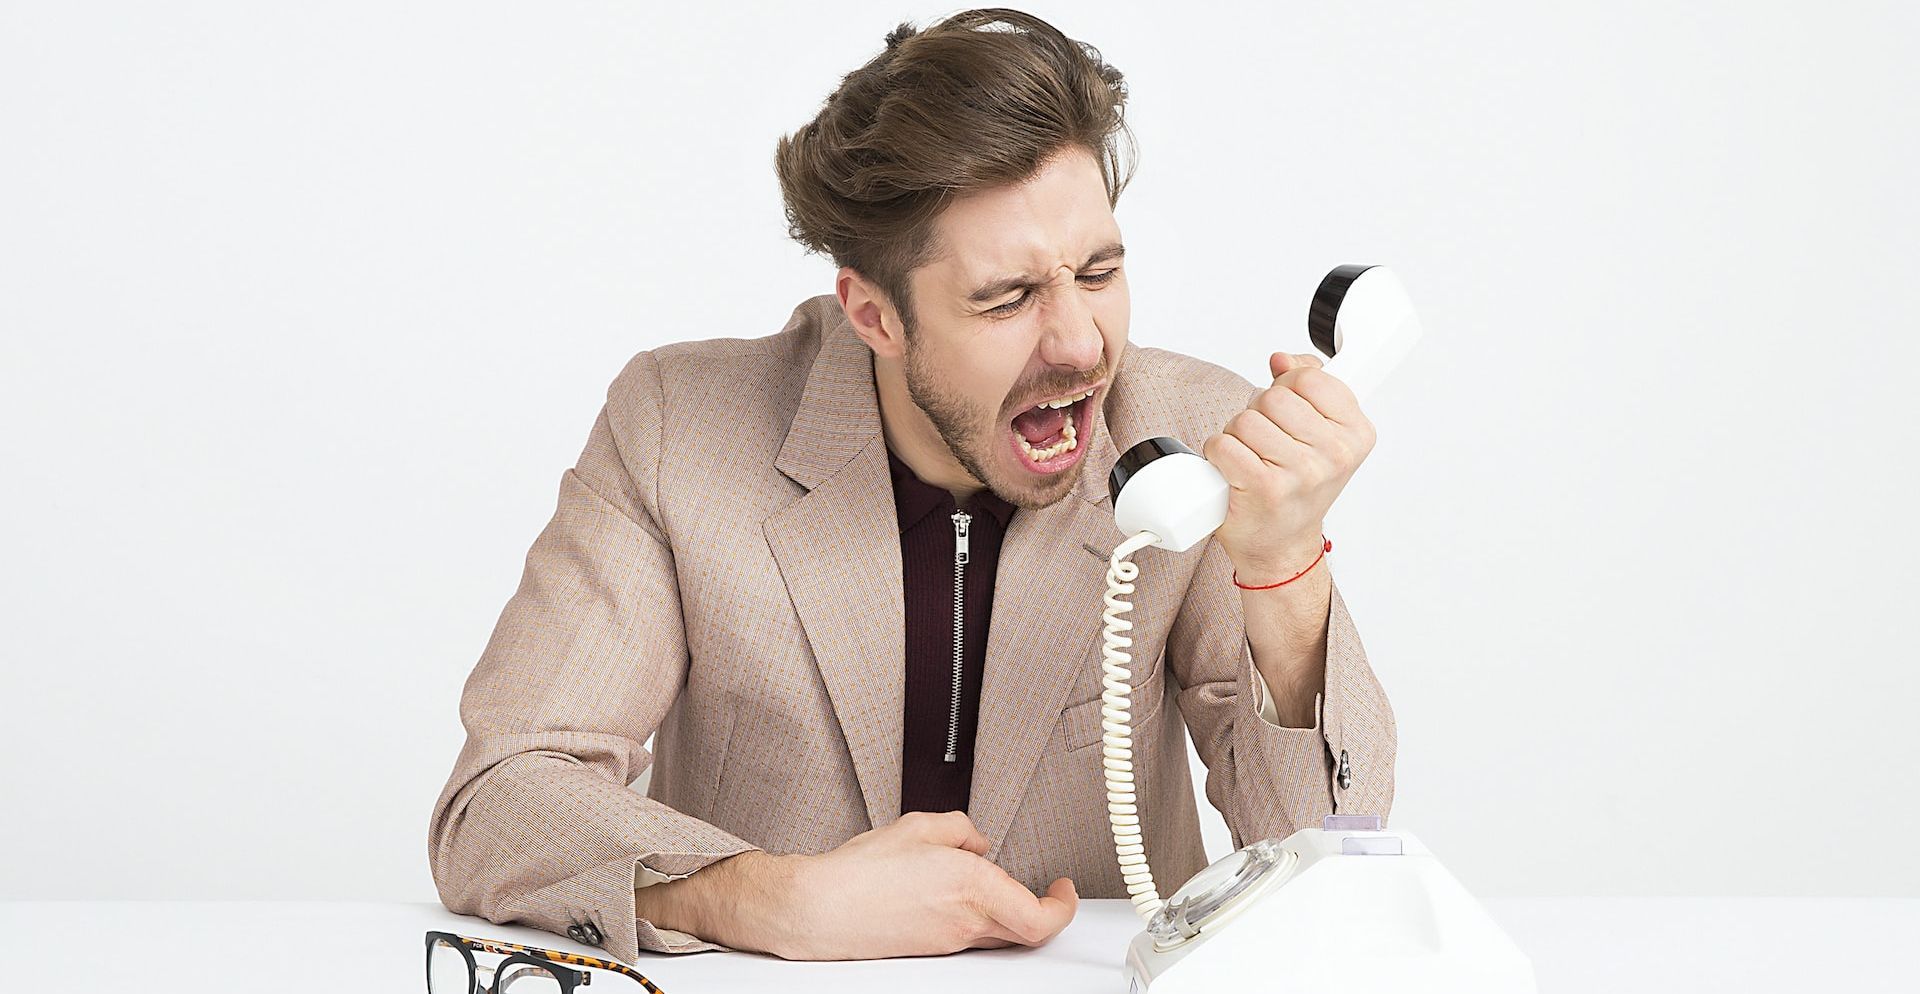 Man Screaming While Attending a Phone Call